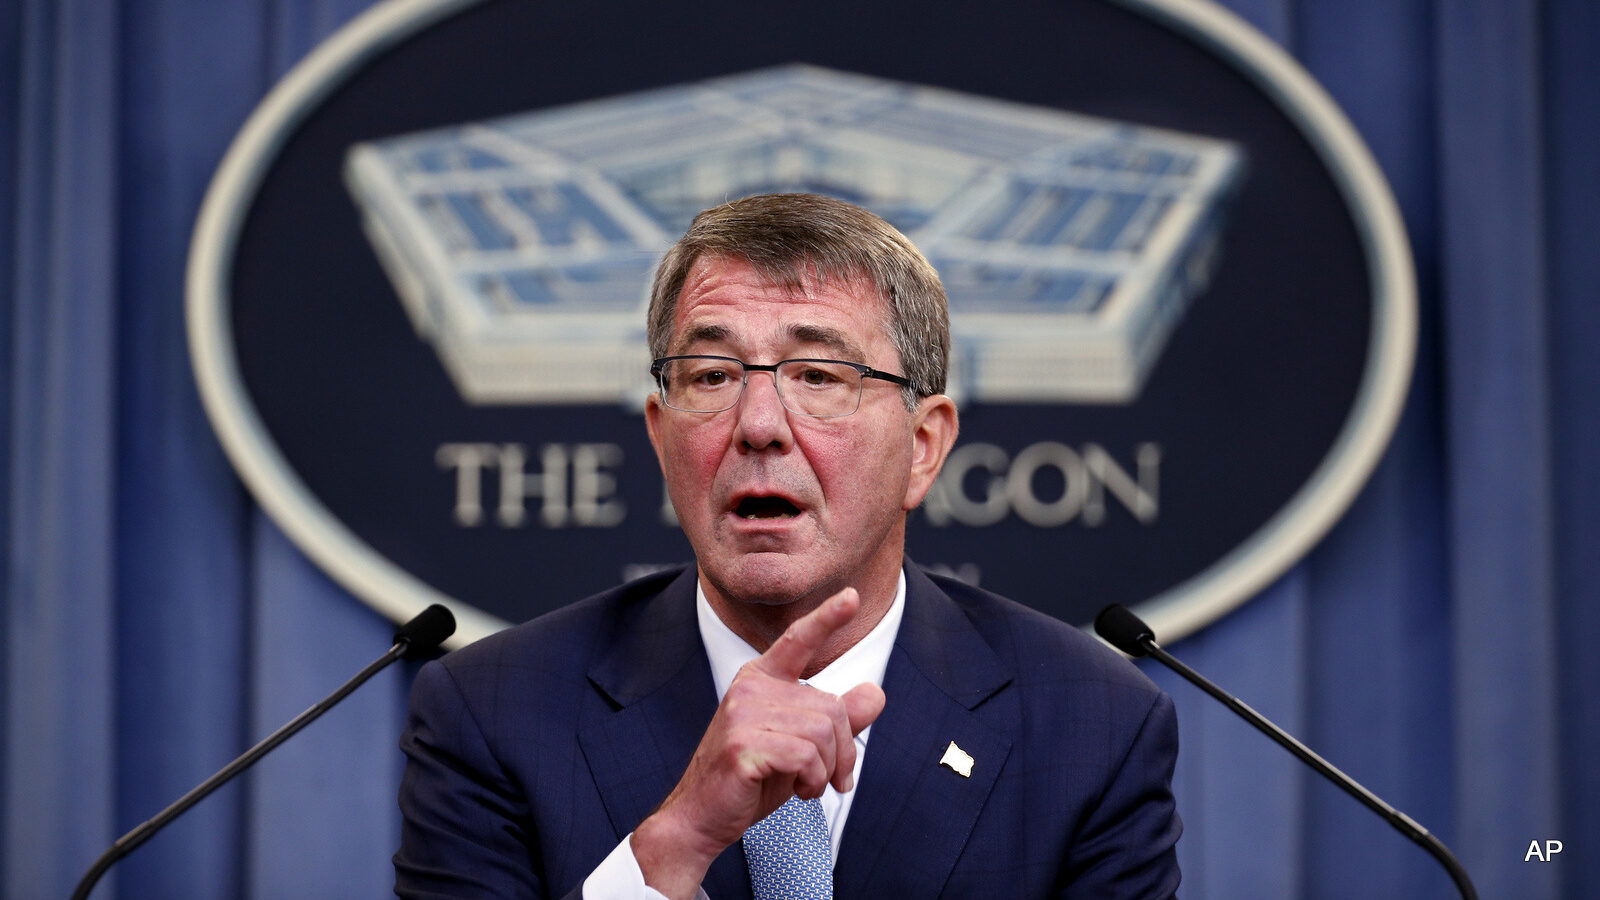 In this June 30, 2016 file photo, Defense Secretary Ash Carter speaks during a news conference at the Pentagon.